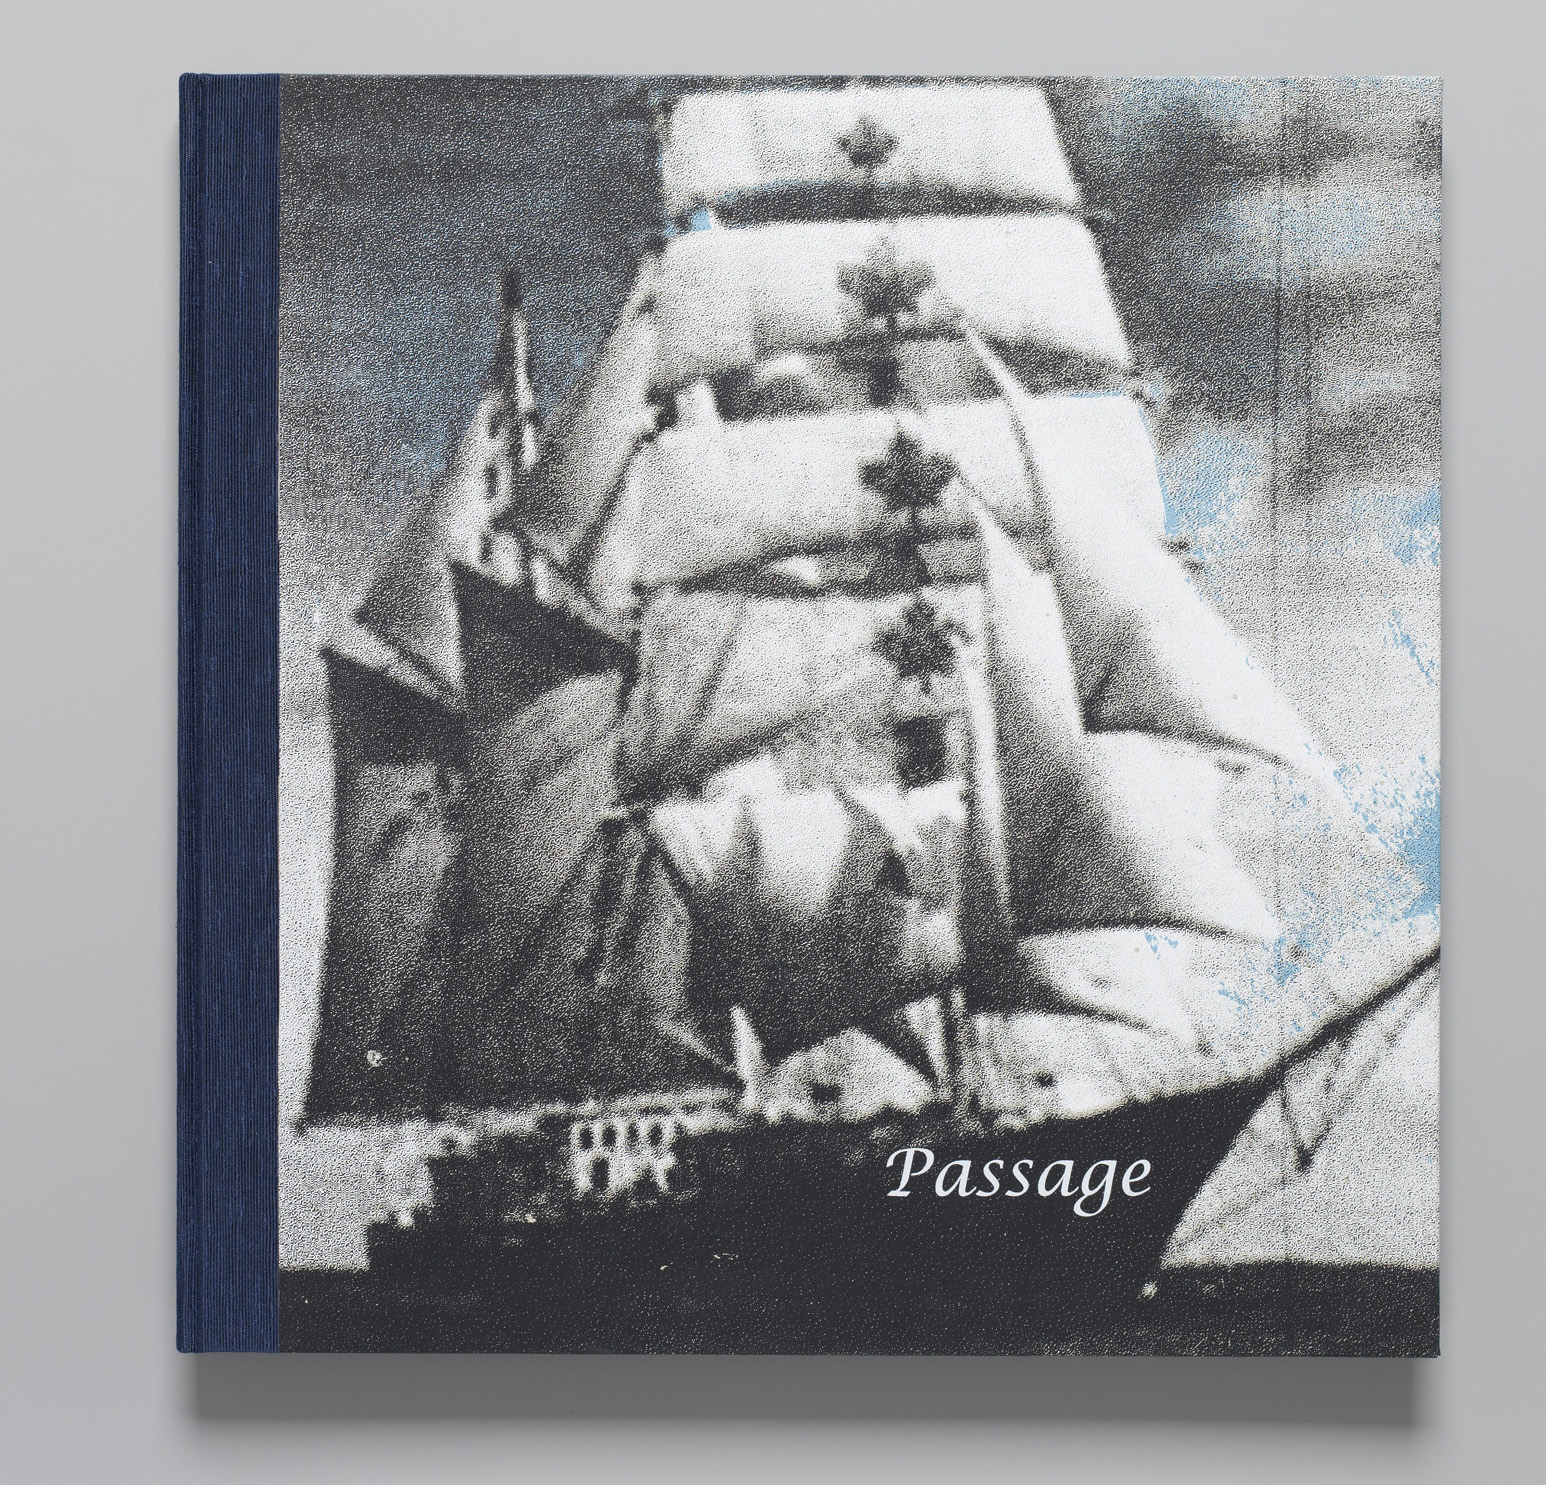 The front cover of Passage. Image courtesy of the artist.